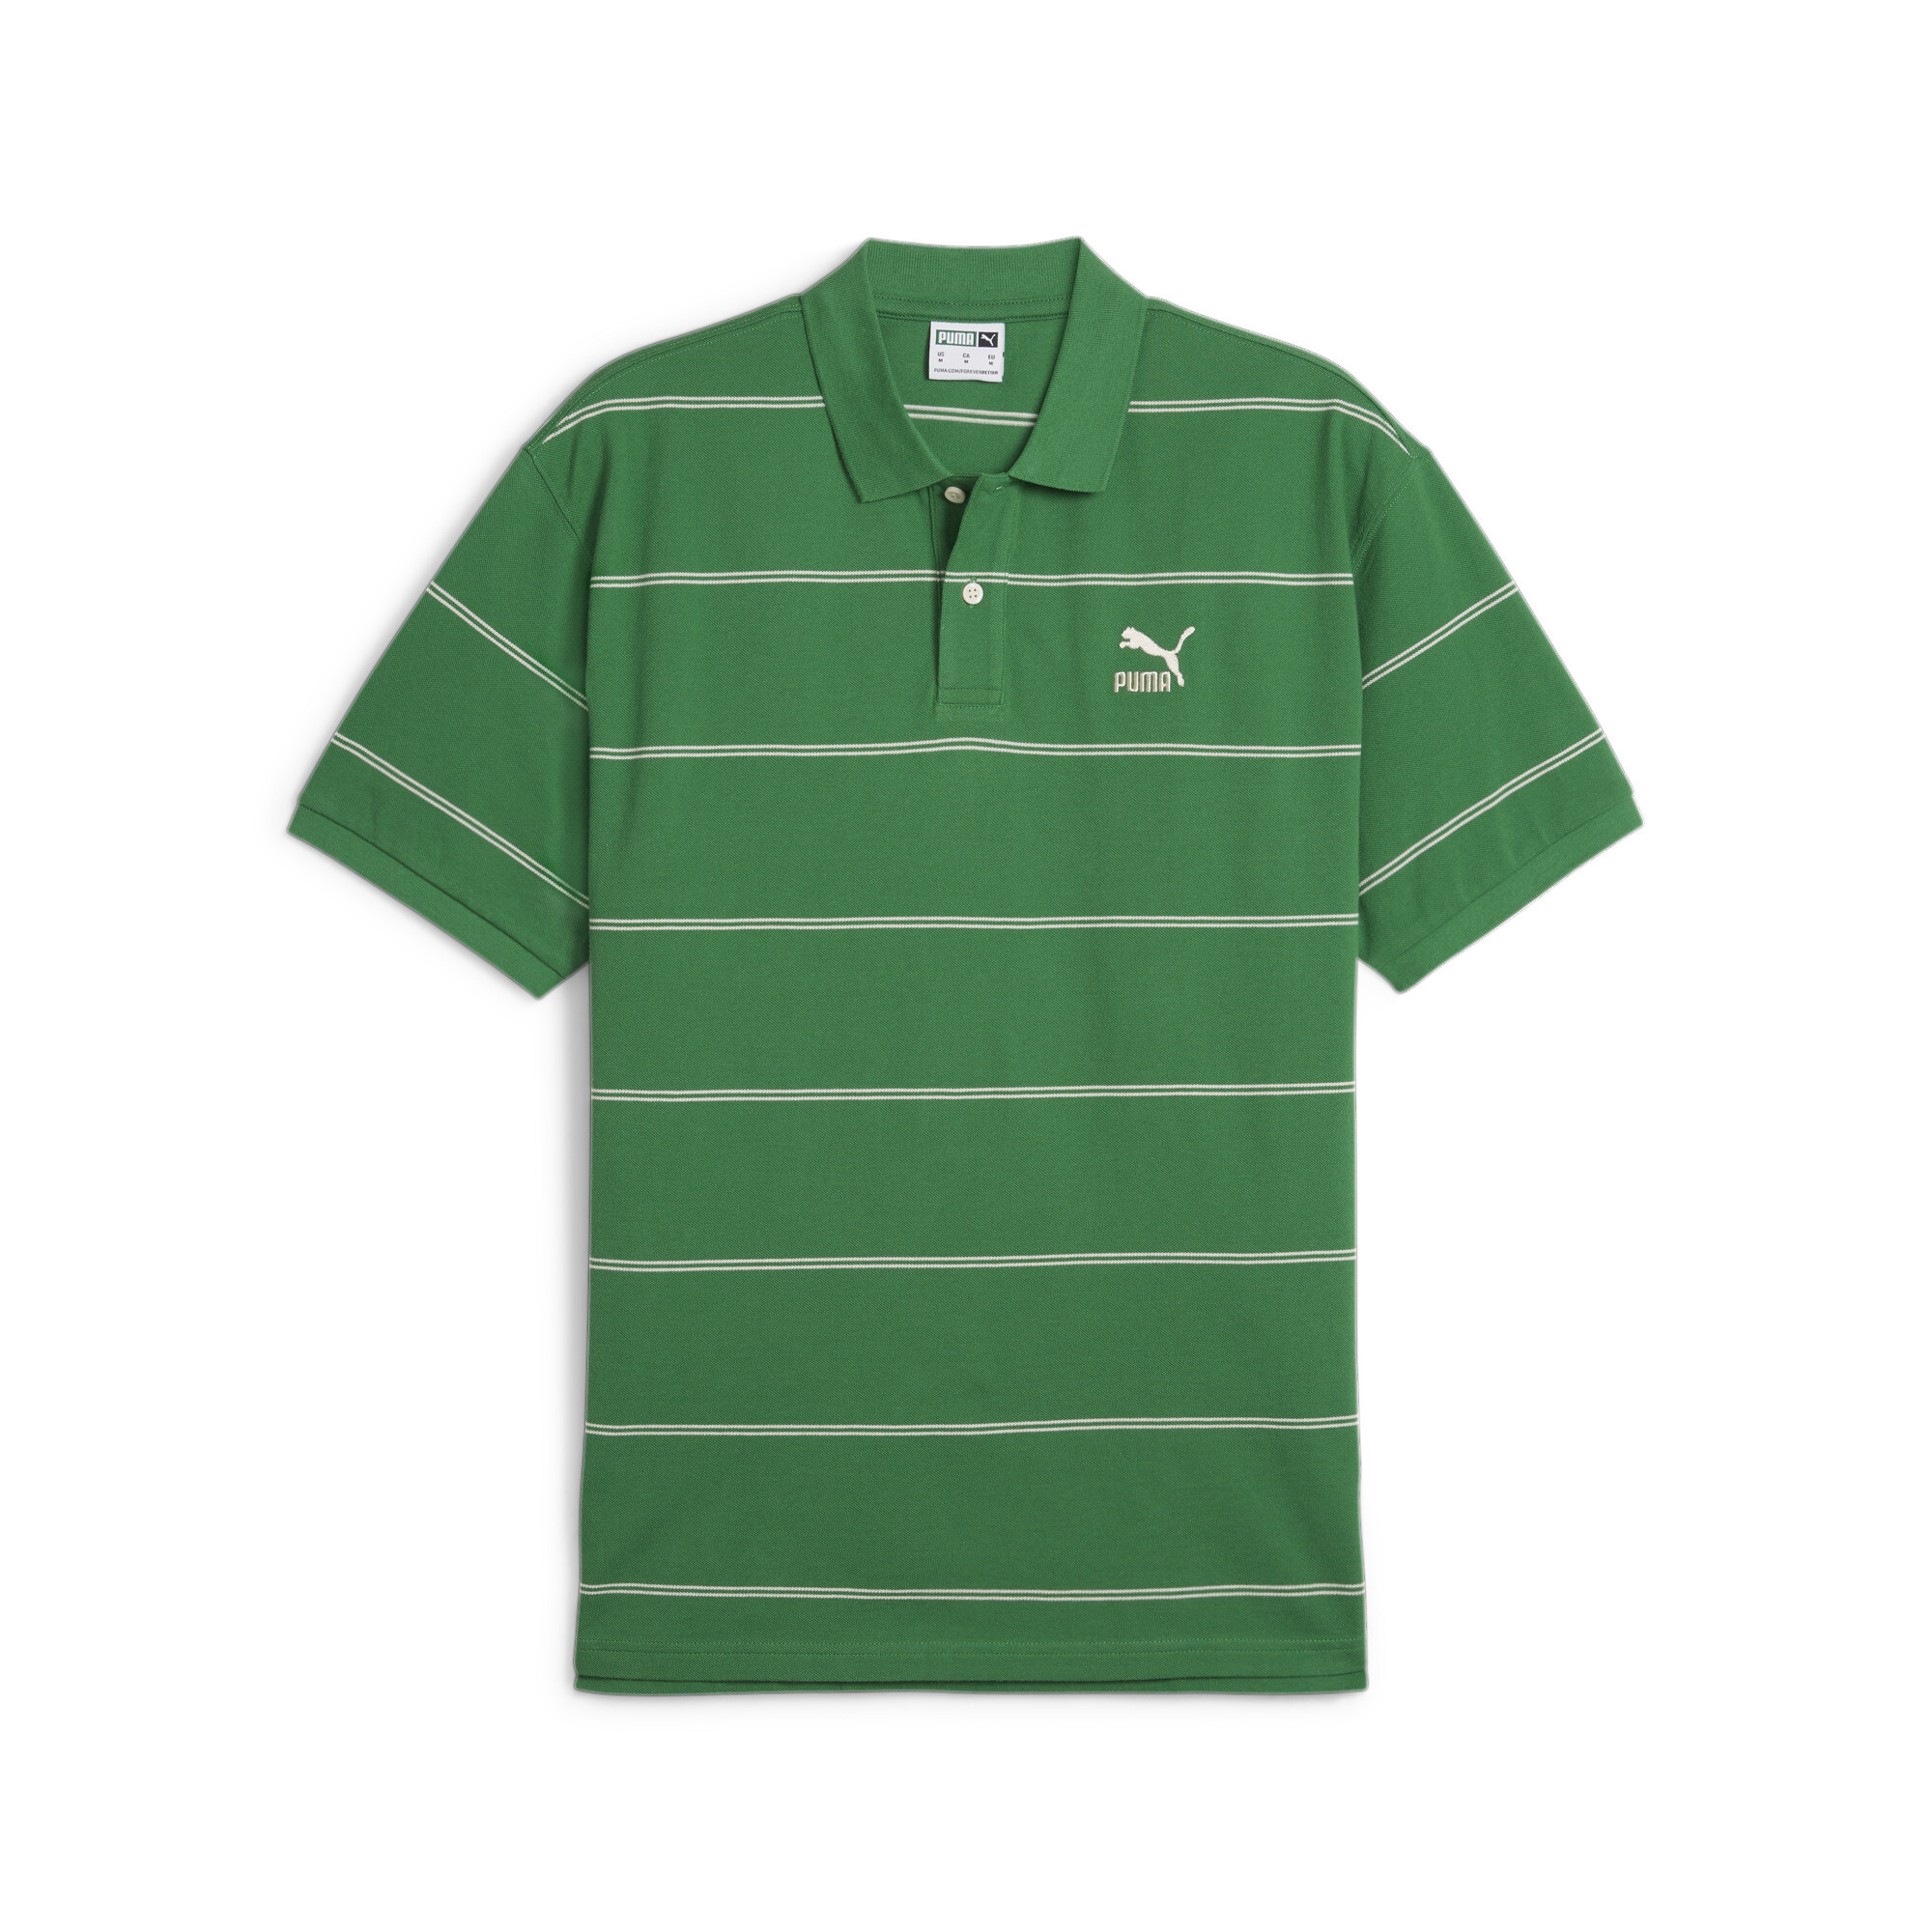 Men's PUMA TEAM Polo In Green, Size Large